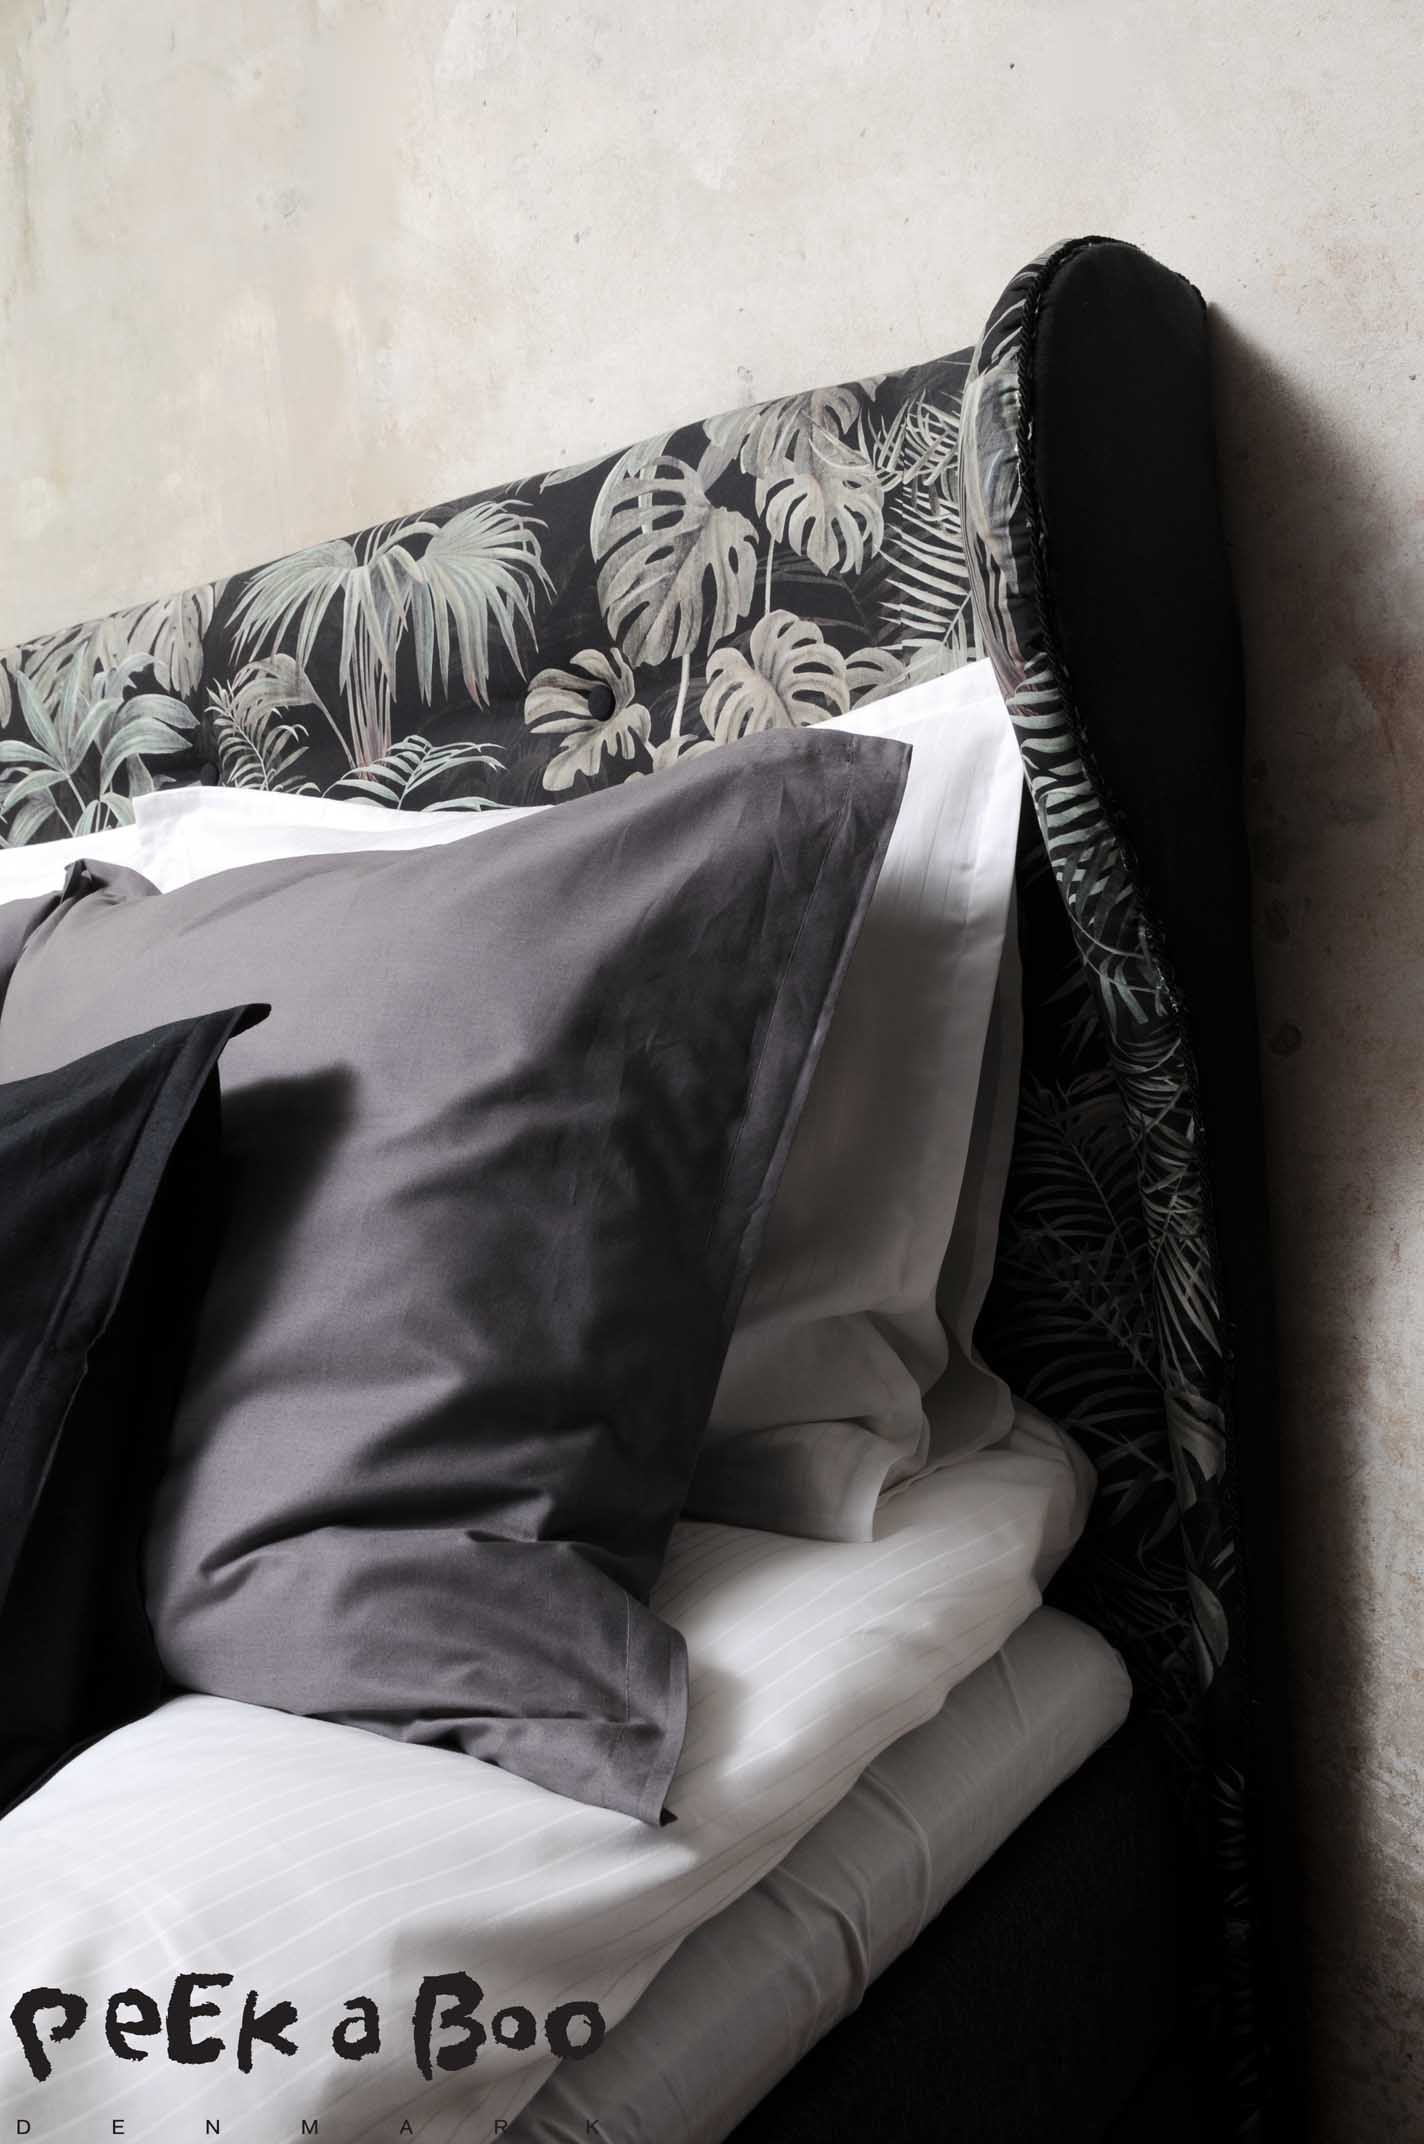 All bedlinen aer from JYSK and held in the colours white, grey and black.